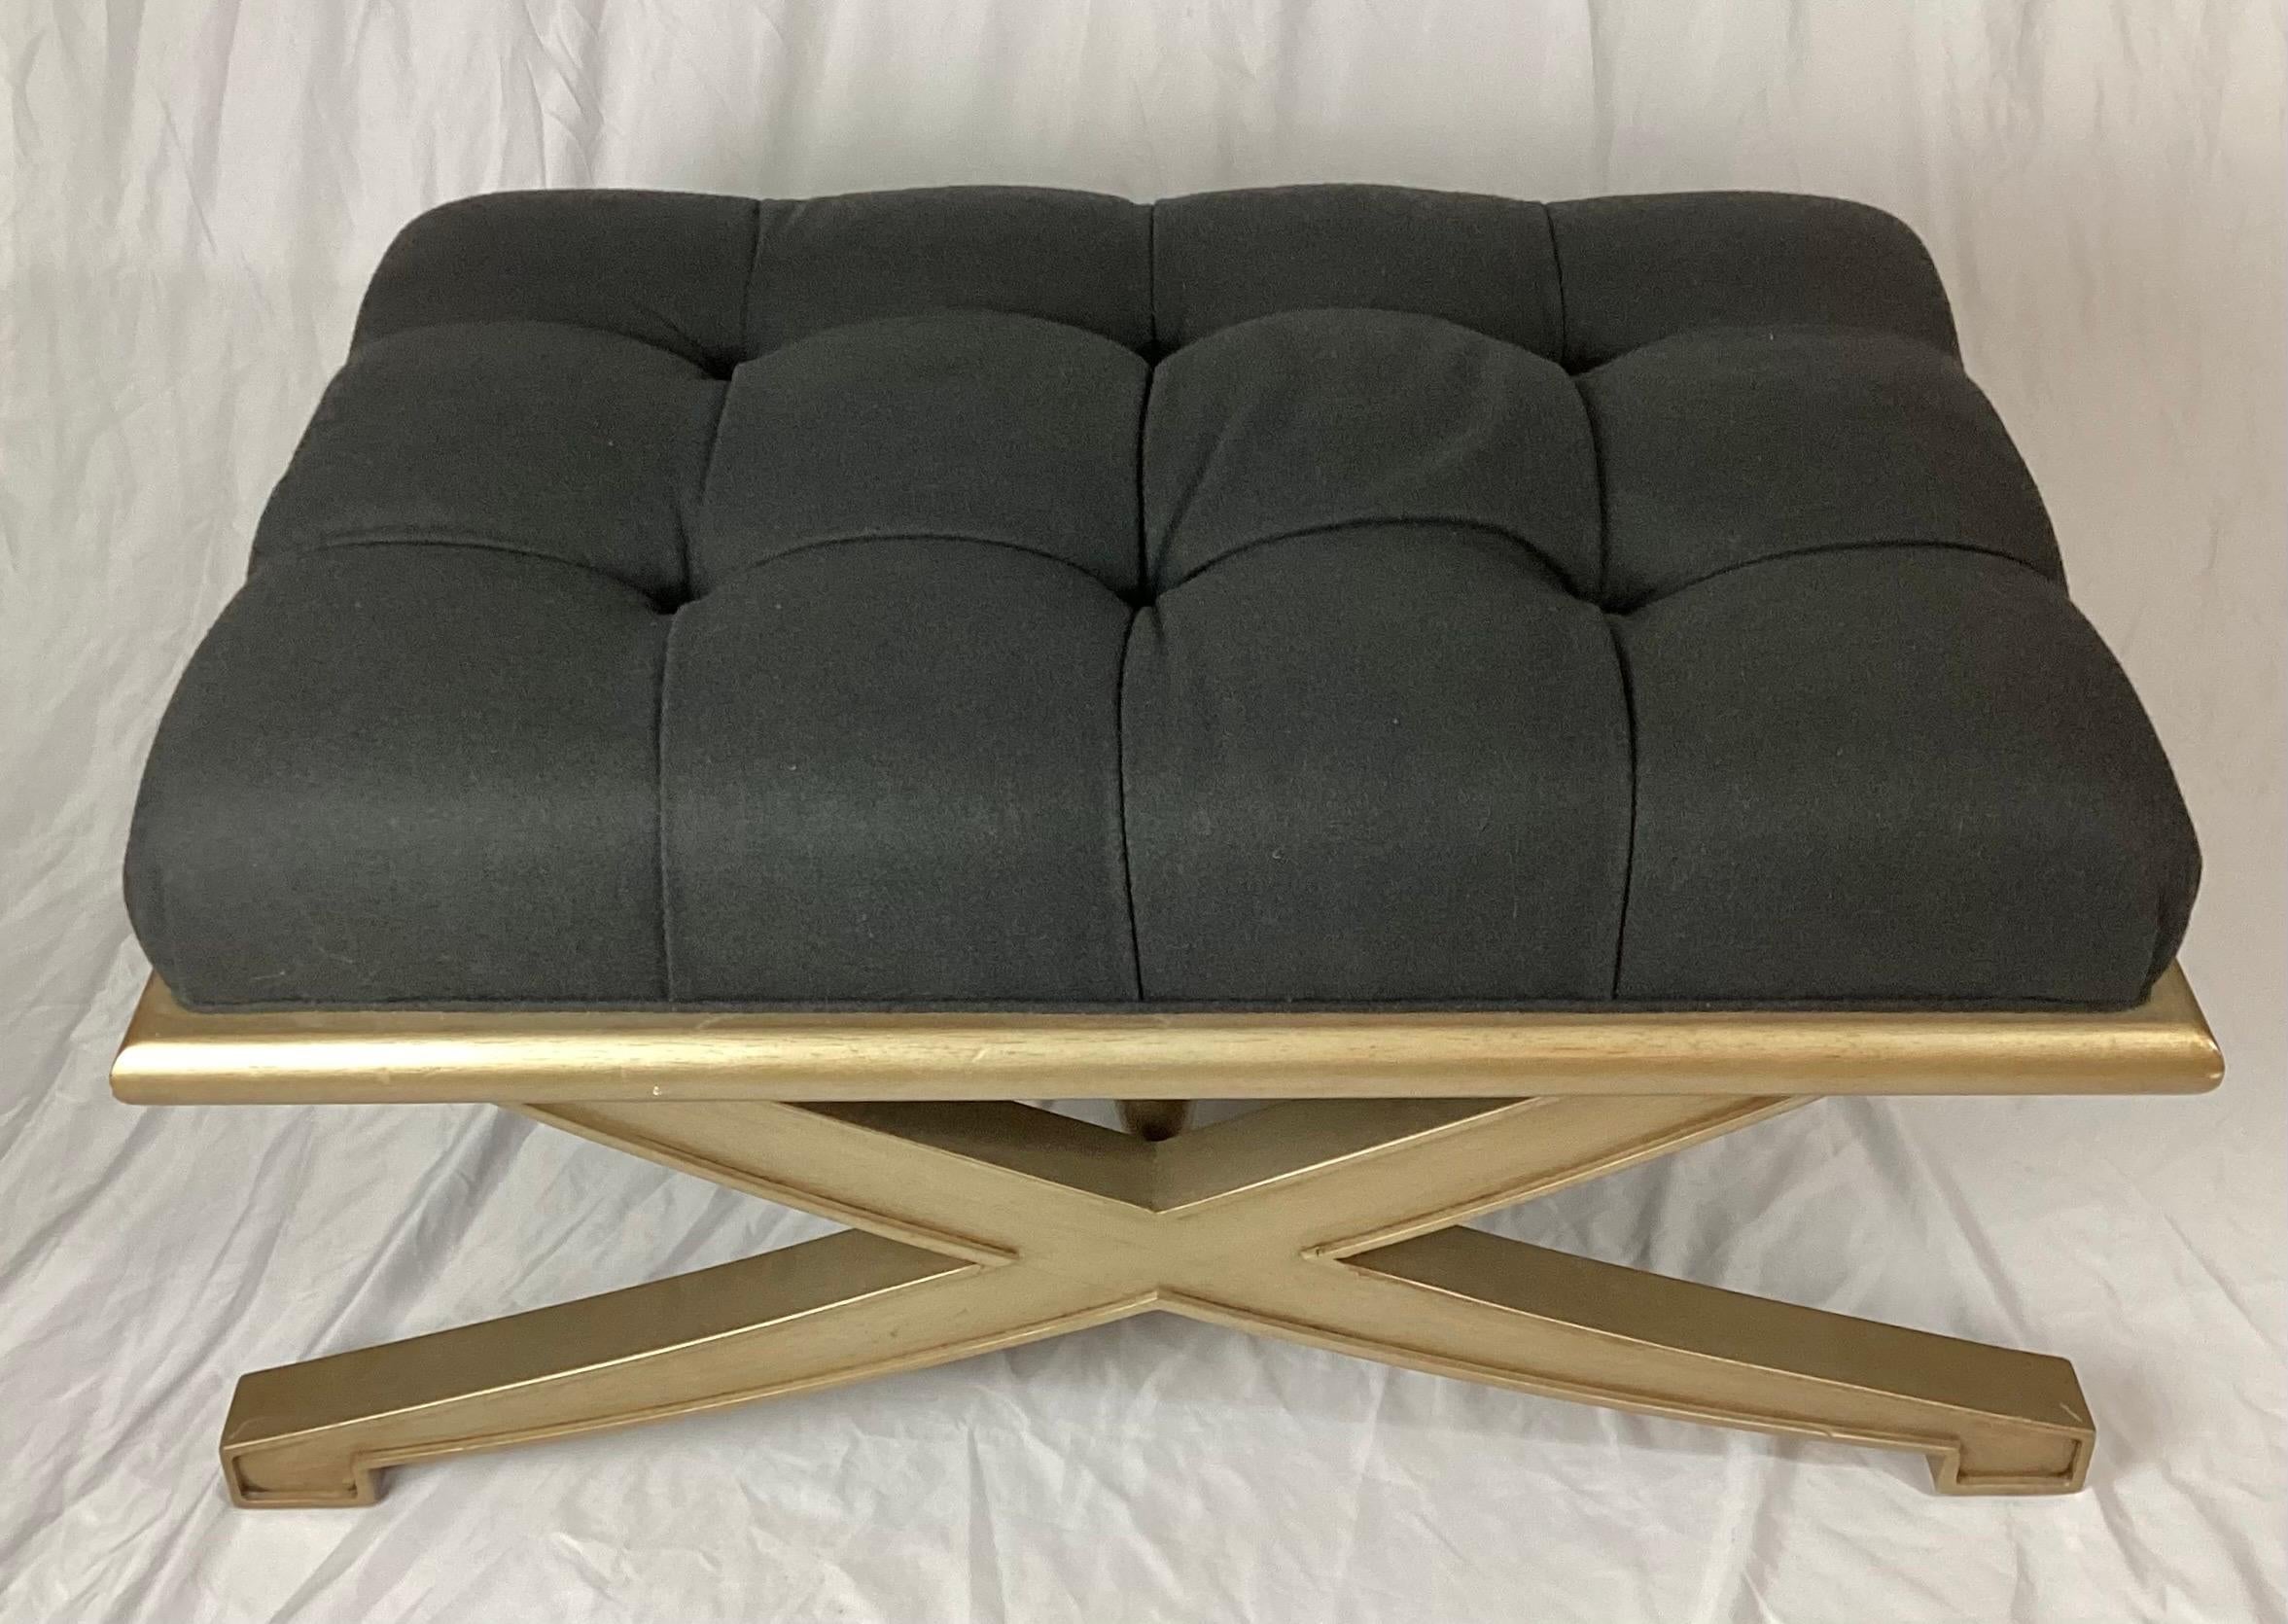 Vanguard Lytton ottoman with grey flannel tufted seat and metallic gold painted base. Nice size for a coffee table bench or just extra seating in a room. Some very minor age appropriate scuffs to the gold.